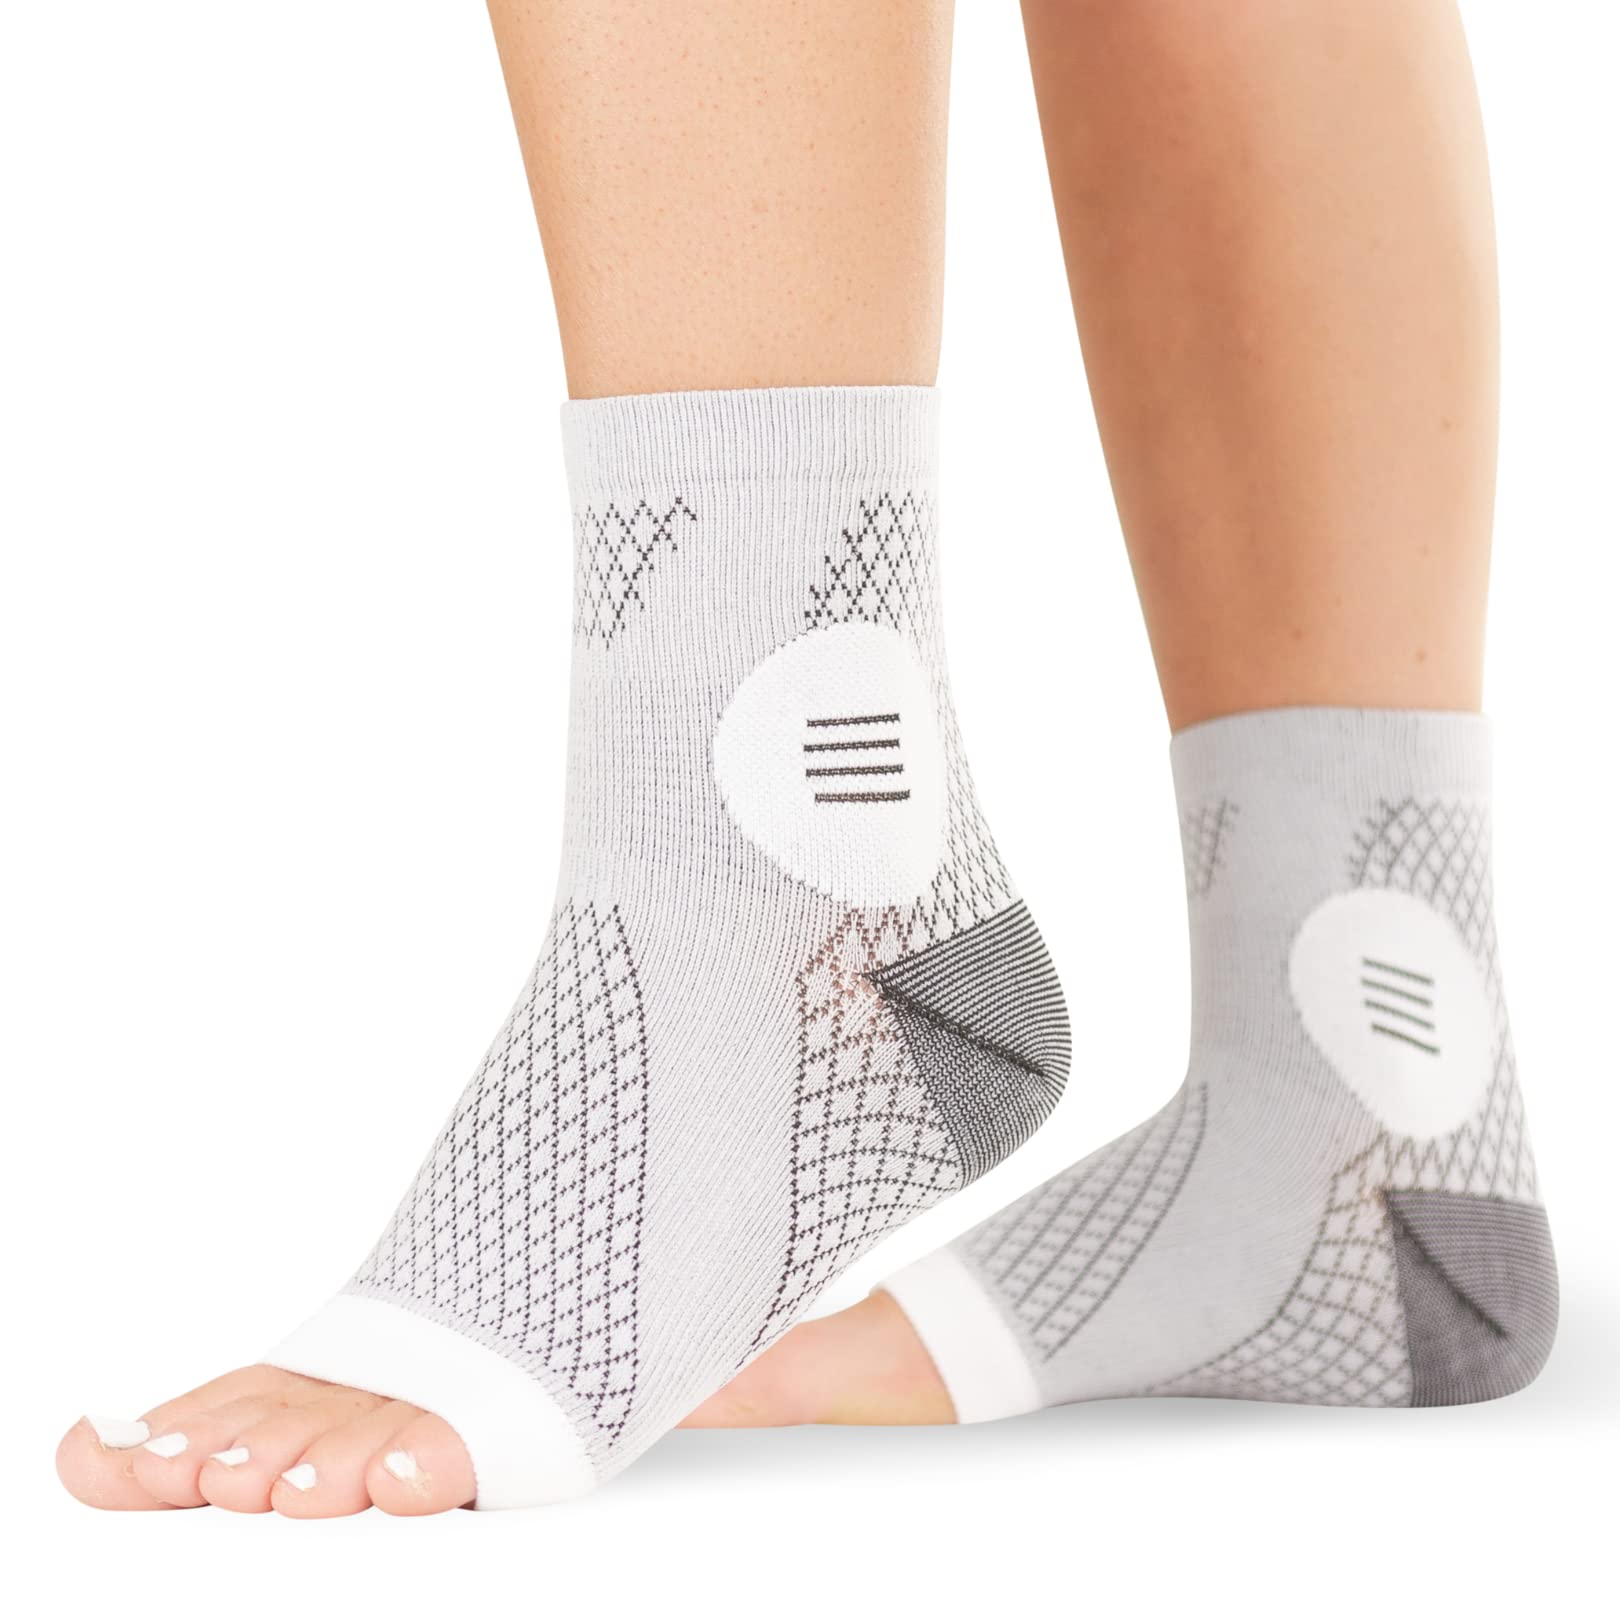 BraceAbility Neuropathy Socks - Peripheral Neuritis Therapy Compression Diabetic Open-Toe Foot Sleeves for Ankle Gout, Nerve Damage Pain in Legs and Feet Relief Brace for Men and Women (M - 1 Pair)